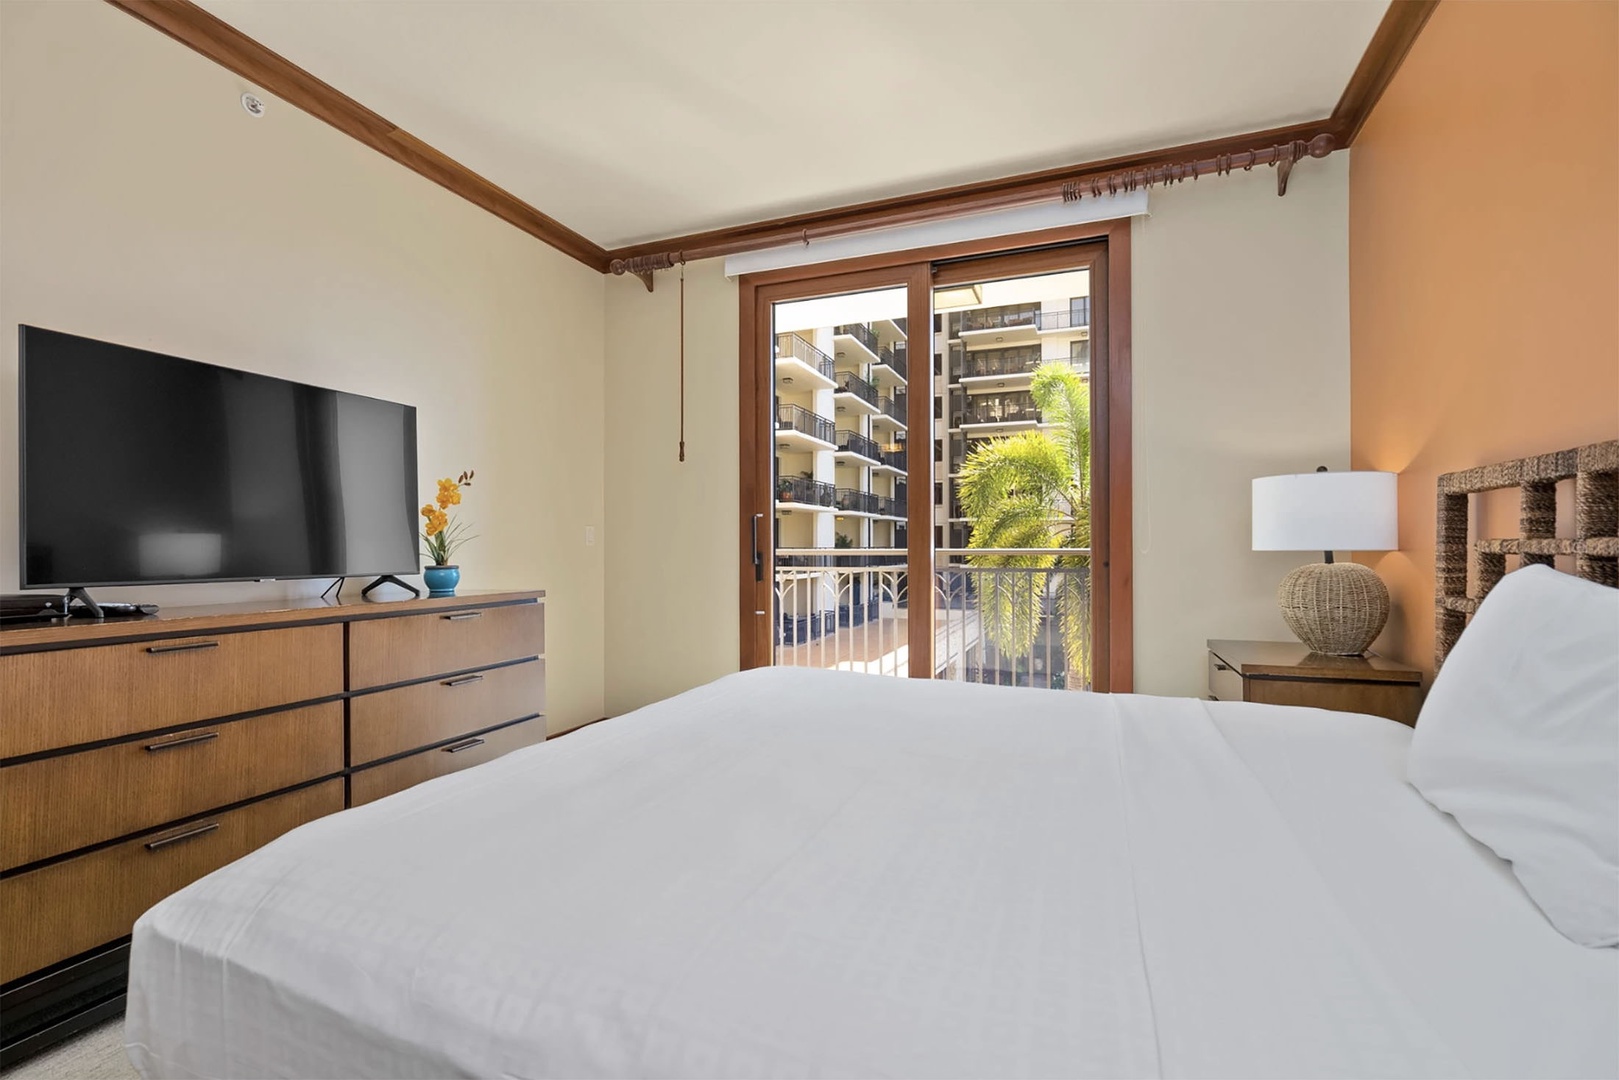 Primary bedroom features a king bed, balcony, ensuite bathroom, and TV